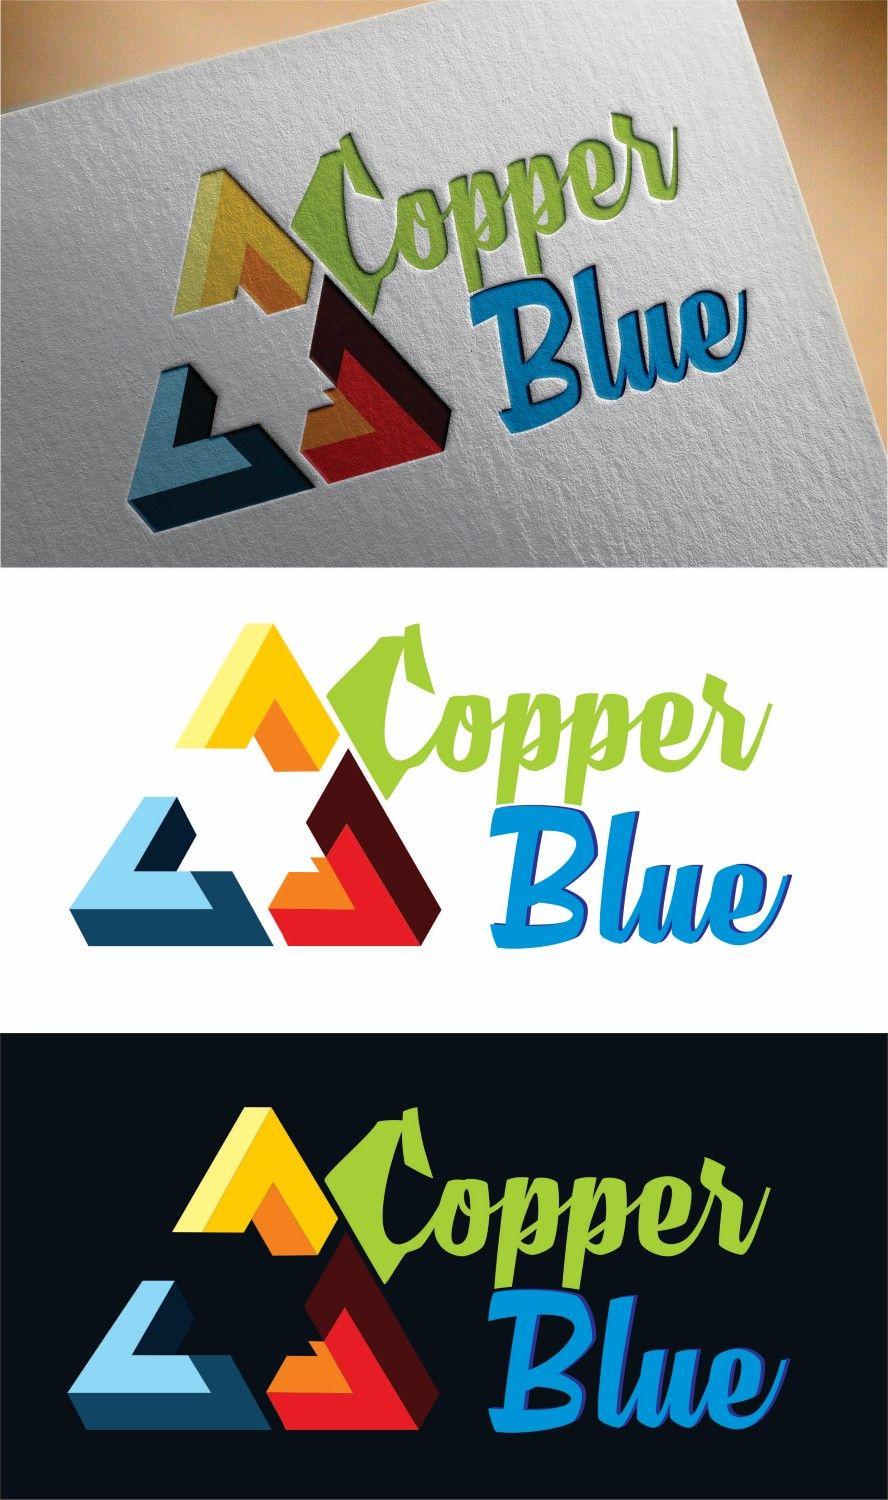 Blue and Copper Logo - Serious, Professional, Investment Logo Design for Copper Blue